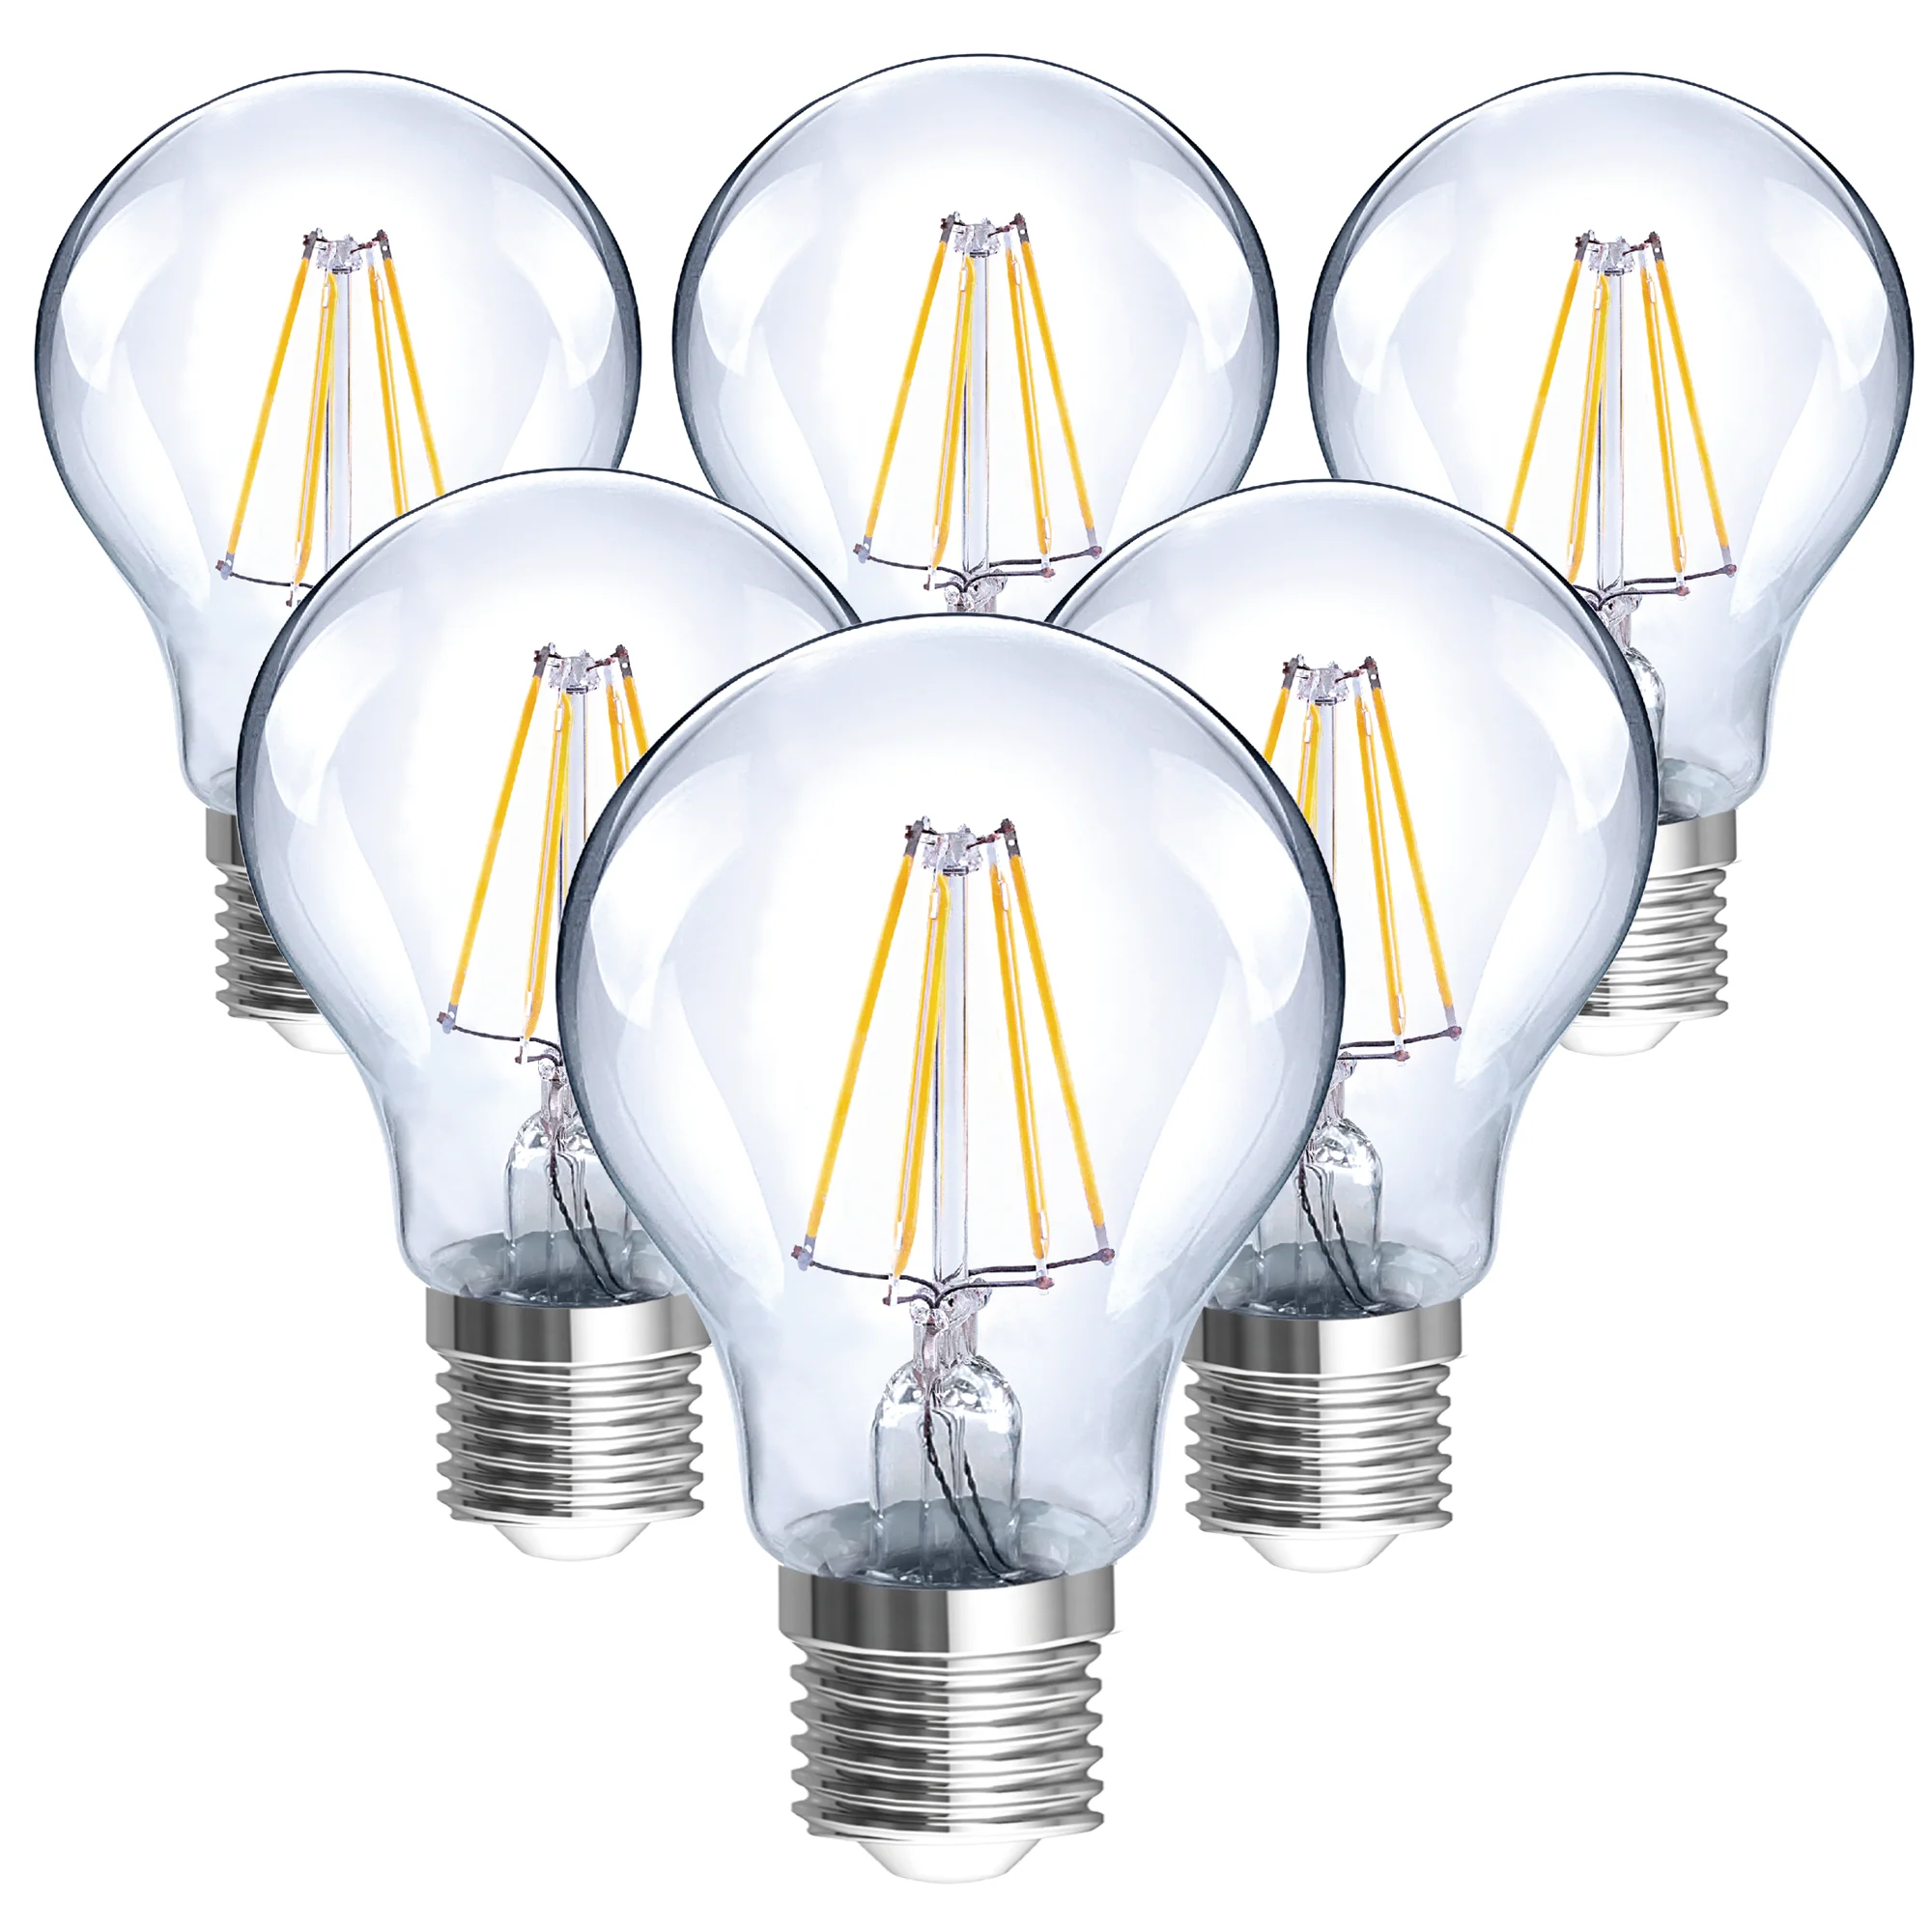 Pack of 6,E27 LED Vintage light bulb with 5W,2700K(Non-Dimmable/360° Beam Angle/Edison Filament/Retro bulb)Clear Glass